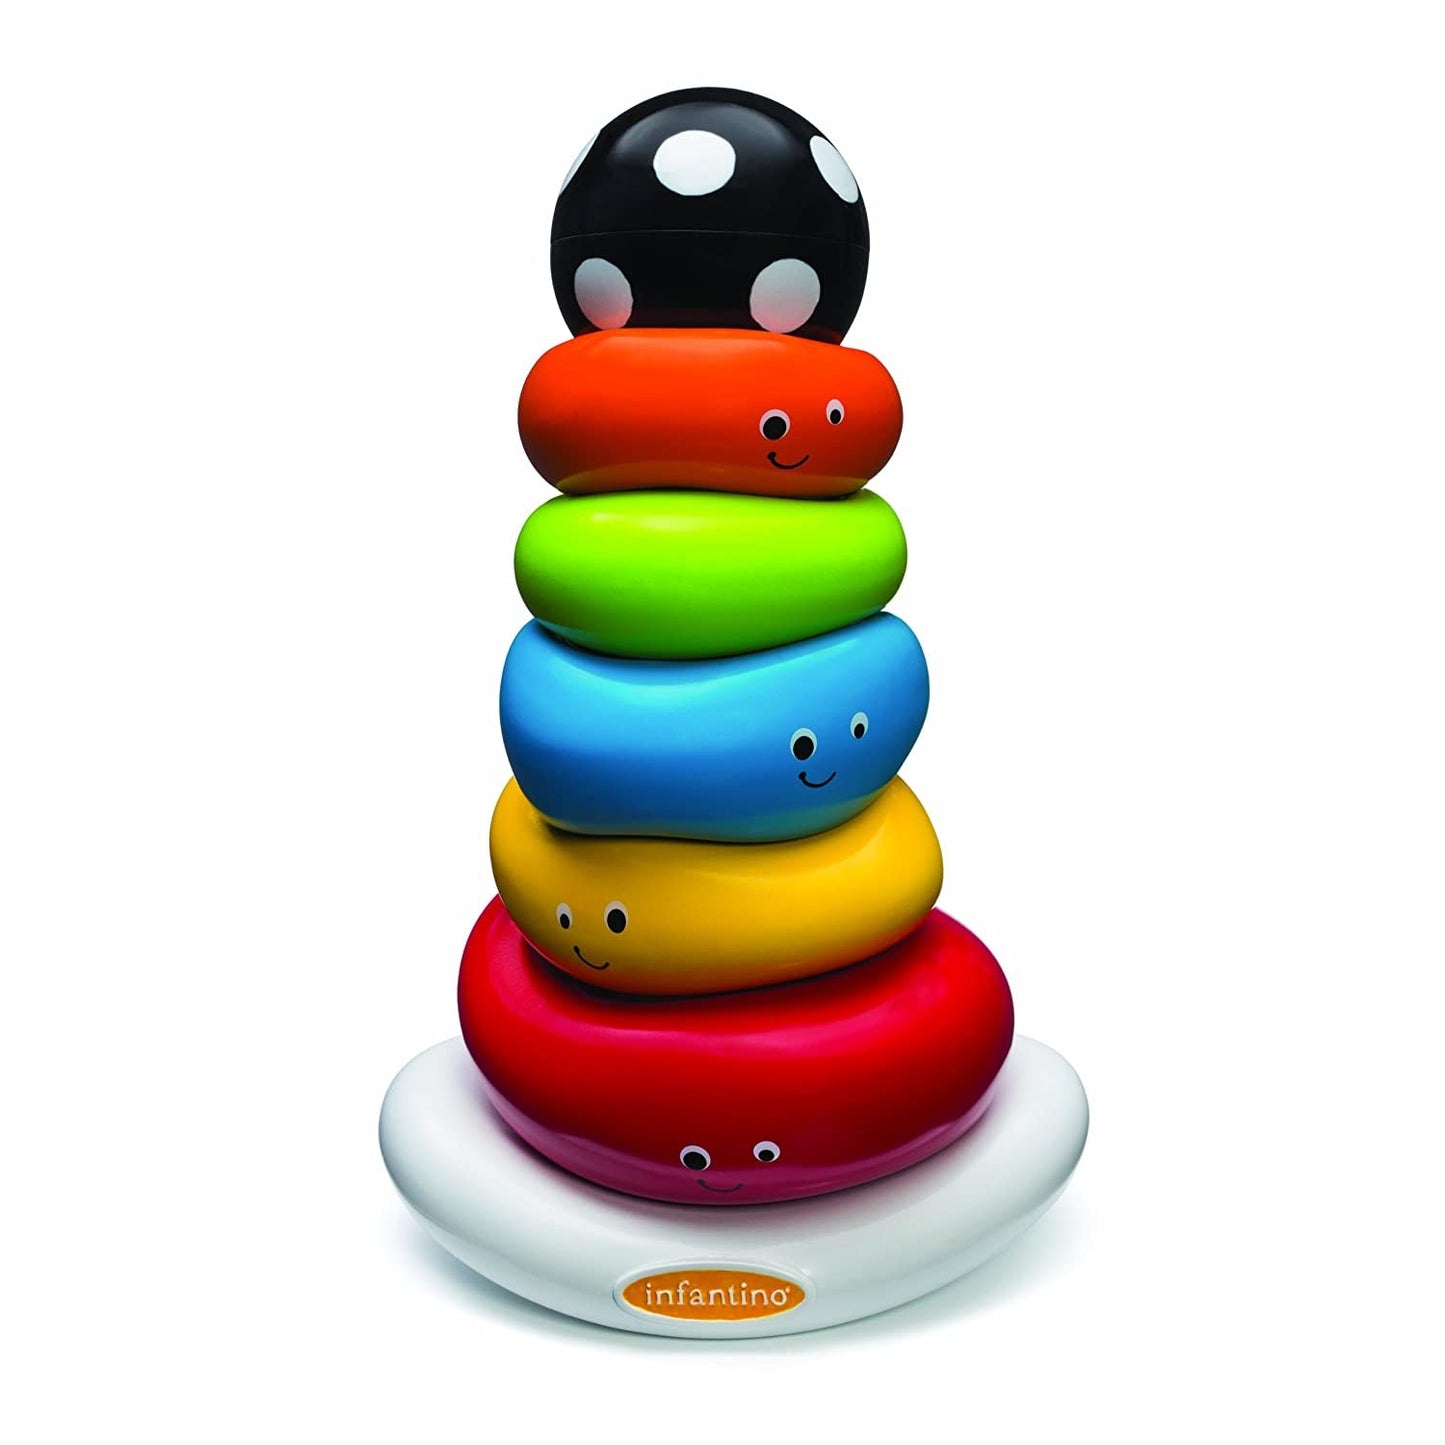 Infantino Funny Faces Ring Stacker Colorful Baby and Toddler Toys for Motor Skills, 5 Pieces